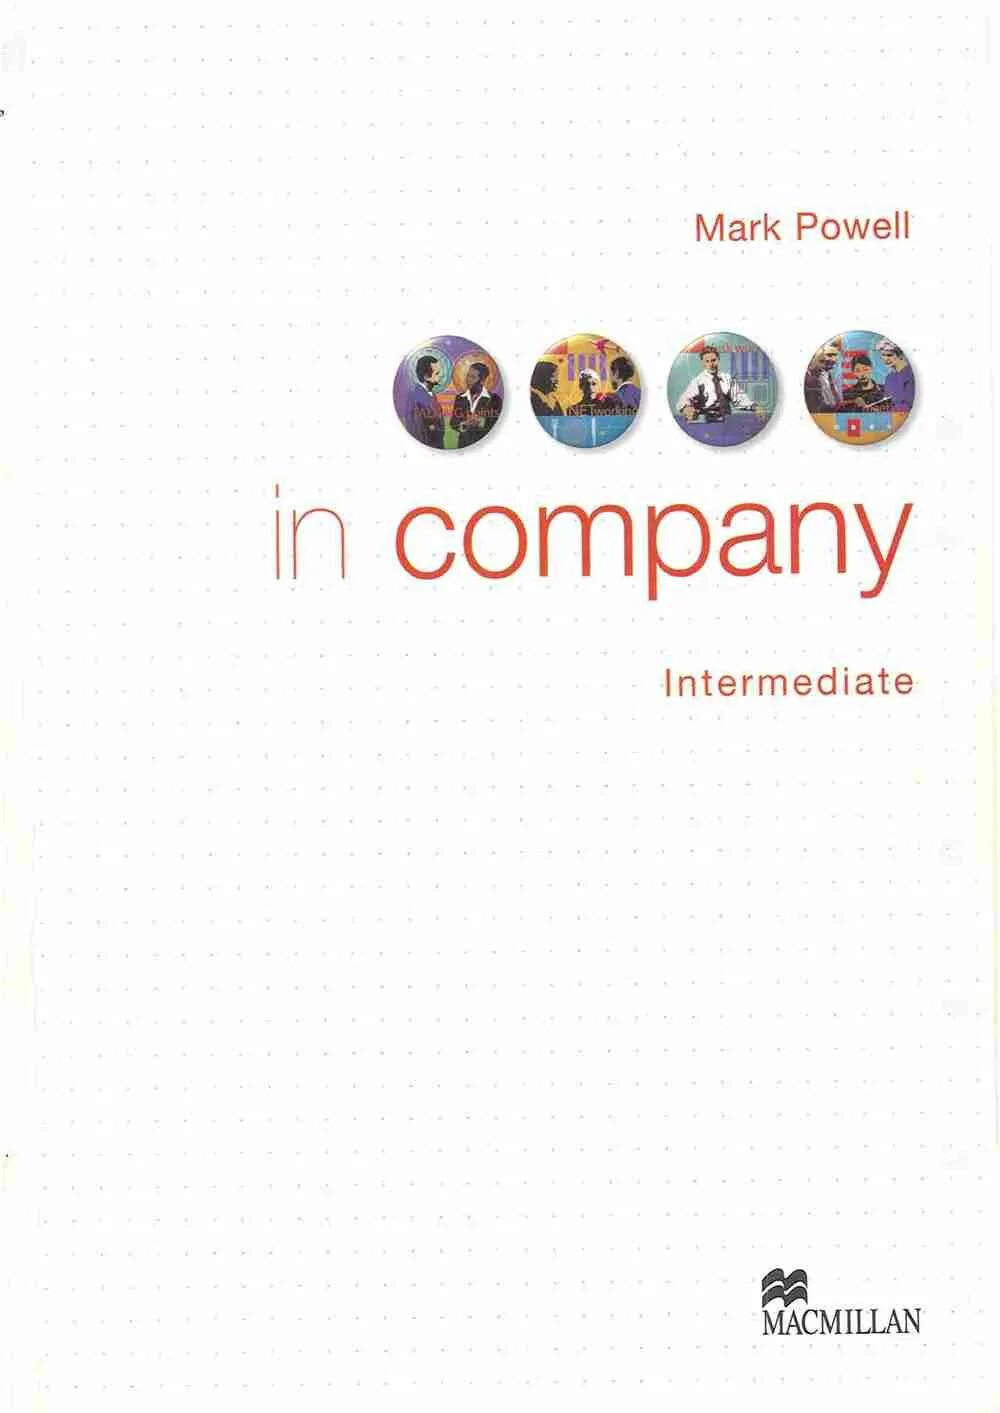 In company answers. Mark Powell in Company Intermediate. In Company Upper Intermediate. In Company. In Company Upper Intermediate second Edition.